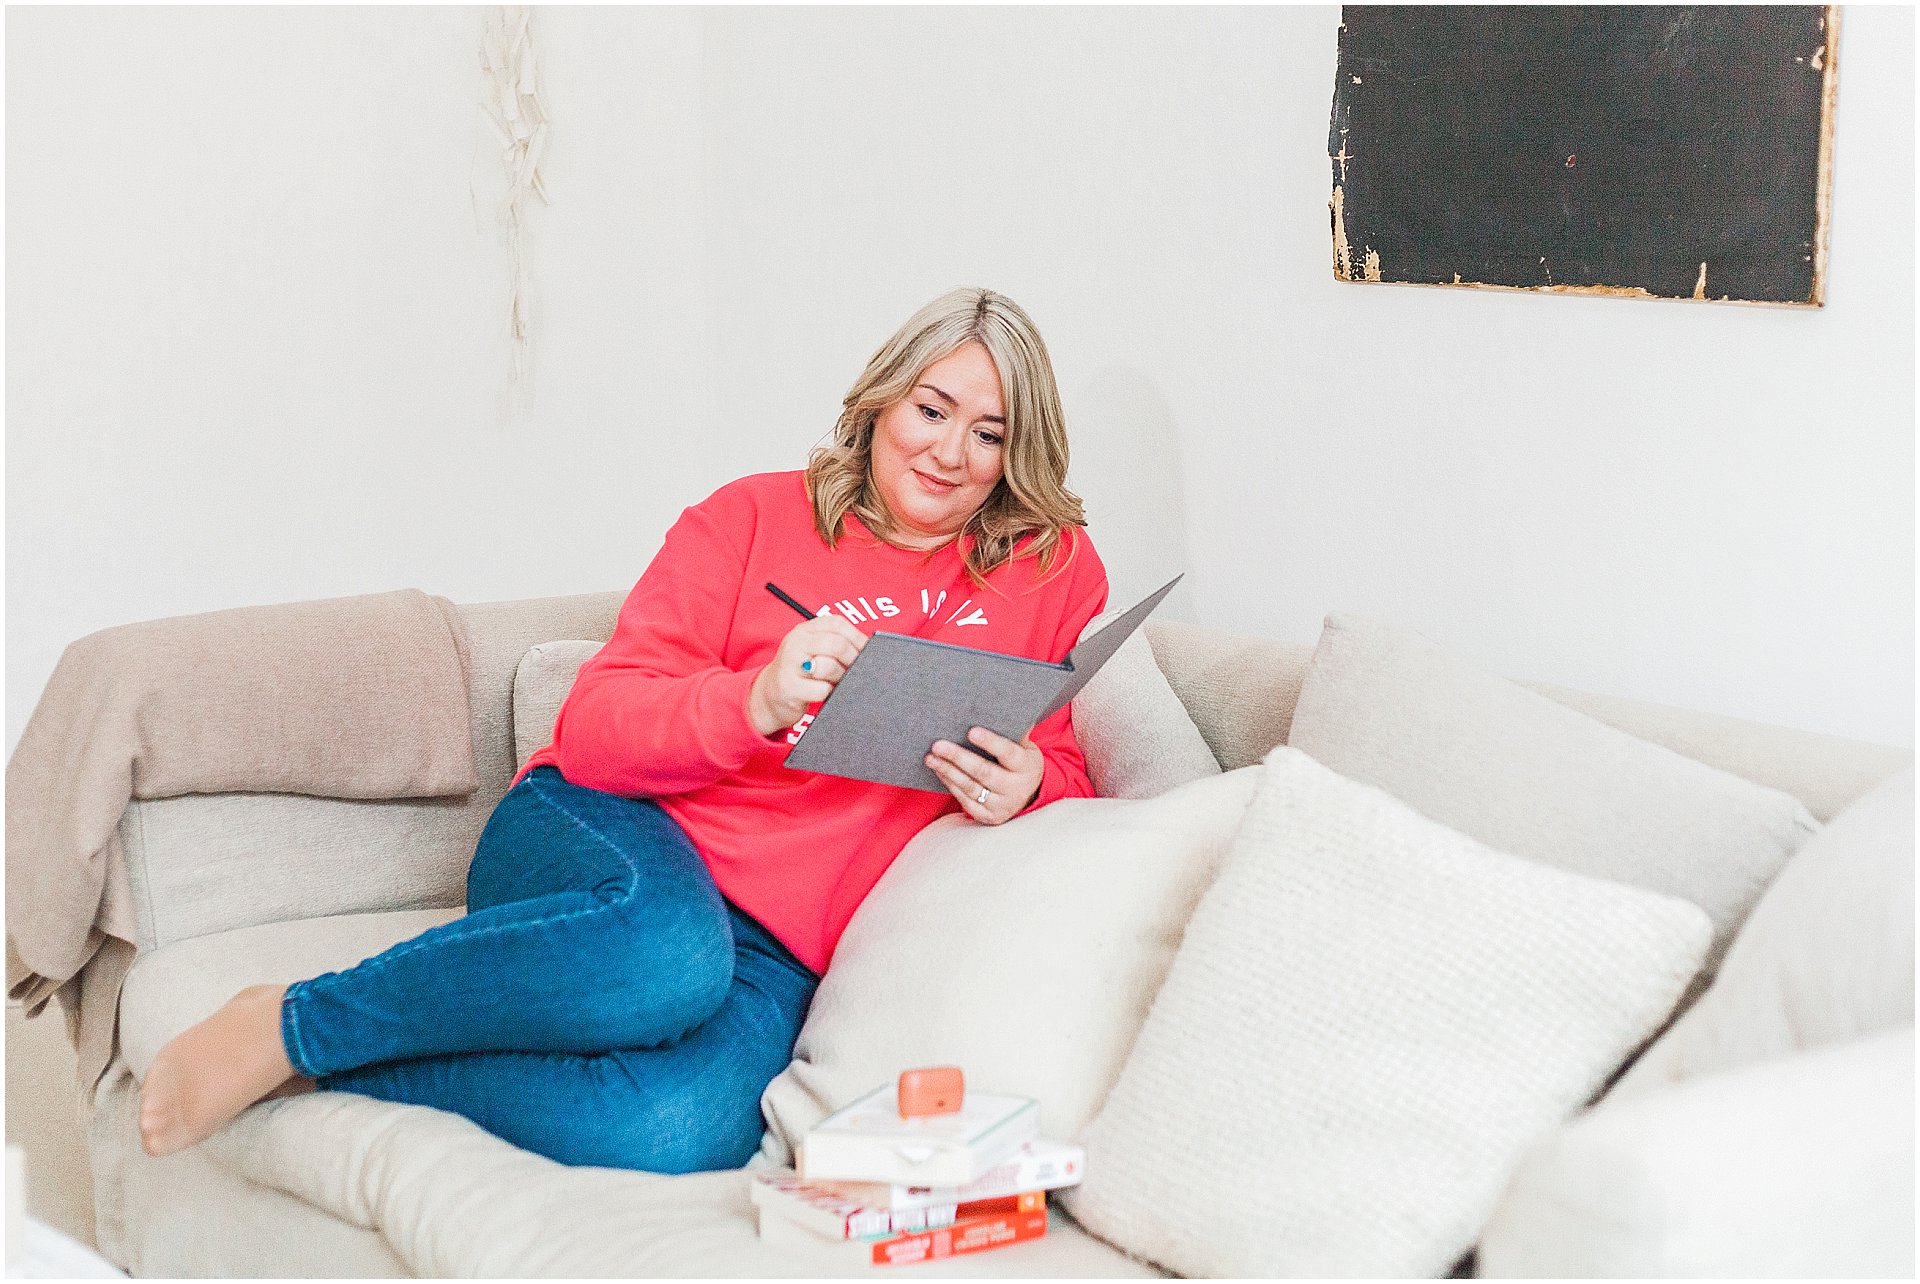 White female with blonde hair in a bright red sweatshirt smiling while writing notes in a journal, comfortably seated on a beige sofa with white and grey cushions, with a black abstract painting on the wall and a stack of books on branding beside her, in a well-lit cosy room.

Image by London brand photographer AKP Branding Stories for the blog post "Brand photography on a budget"